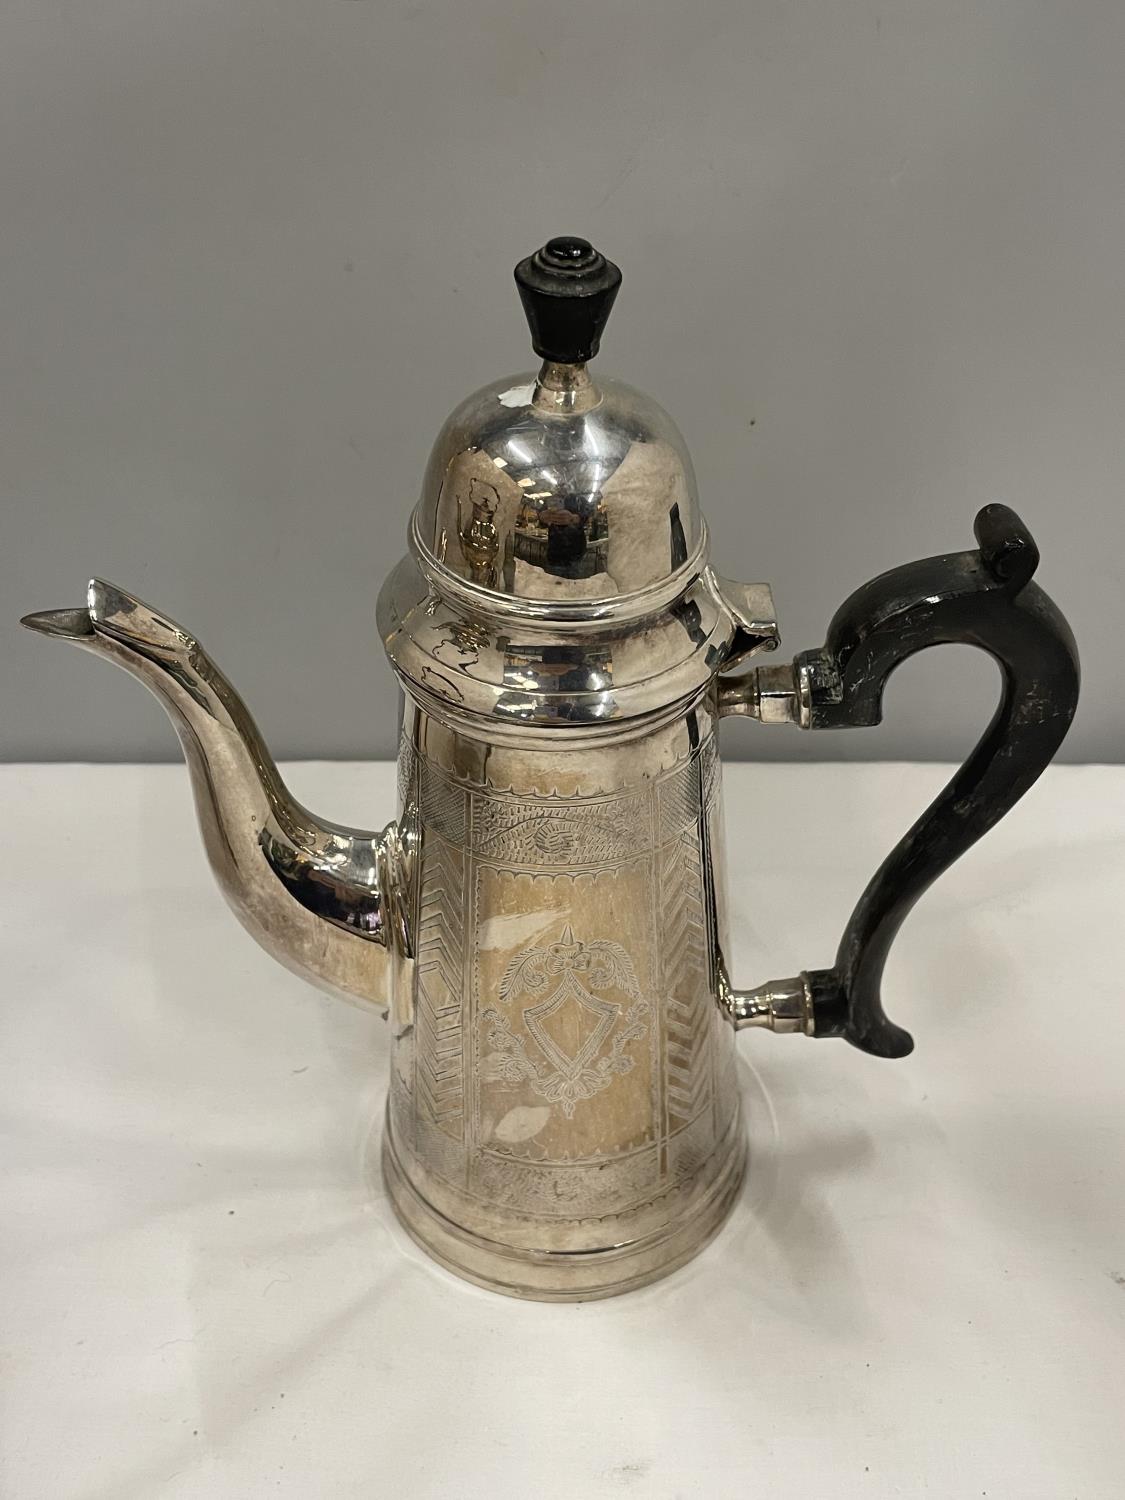 THREE SILVER PLATED ITEMS TO INCLUDE A SPIRIT KETTLE, COFFEE POT AND A SUGAR SIFTER - Image 6 of 10